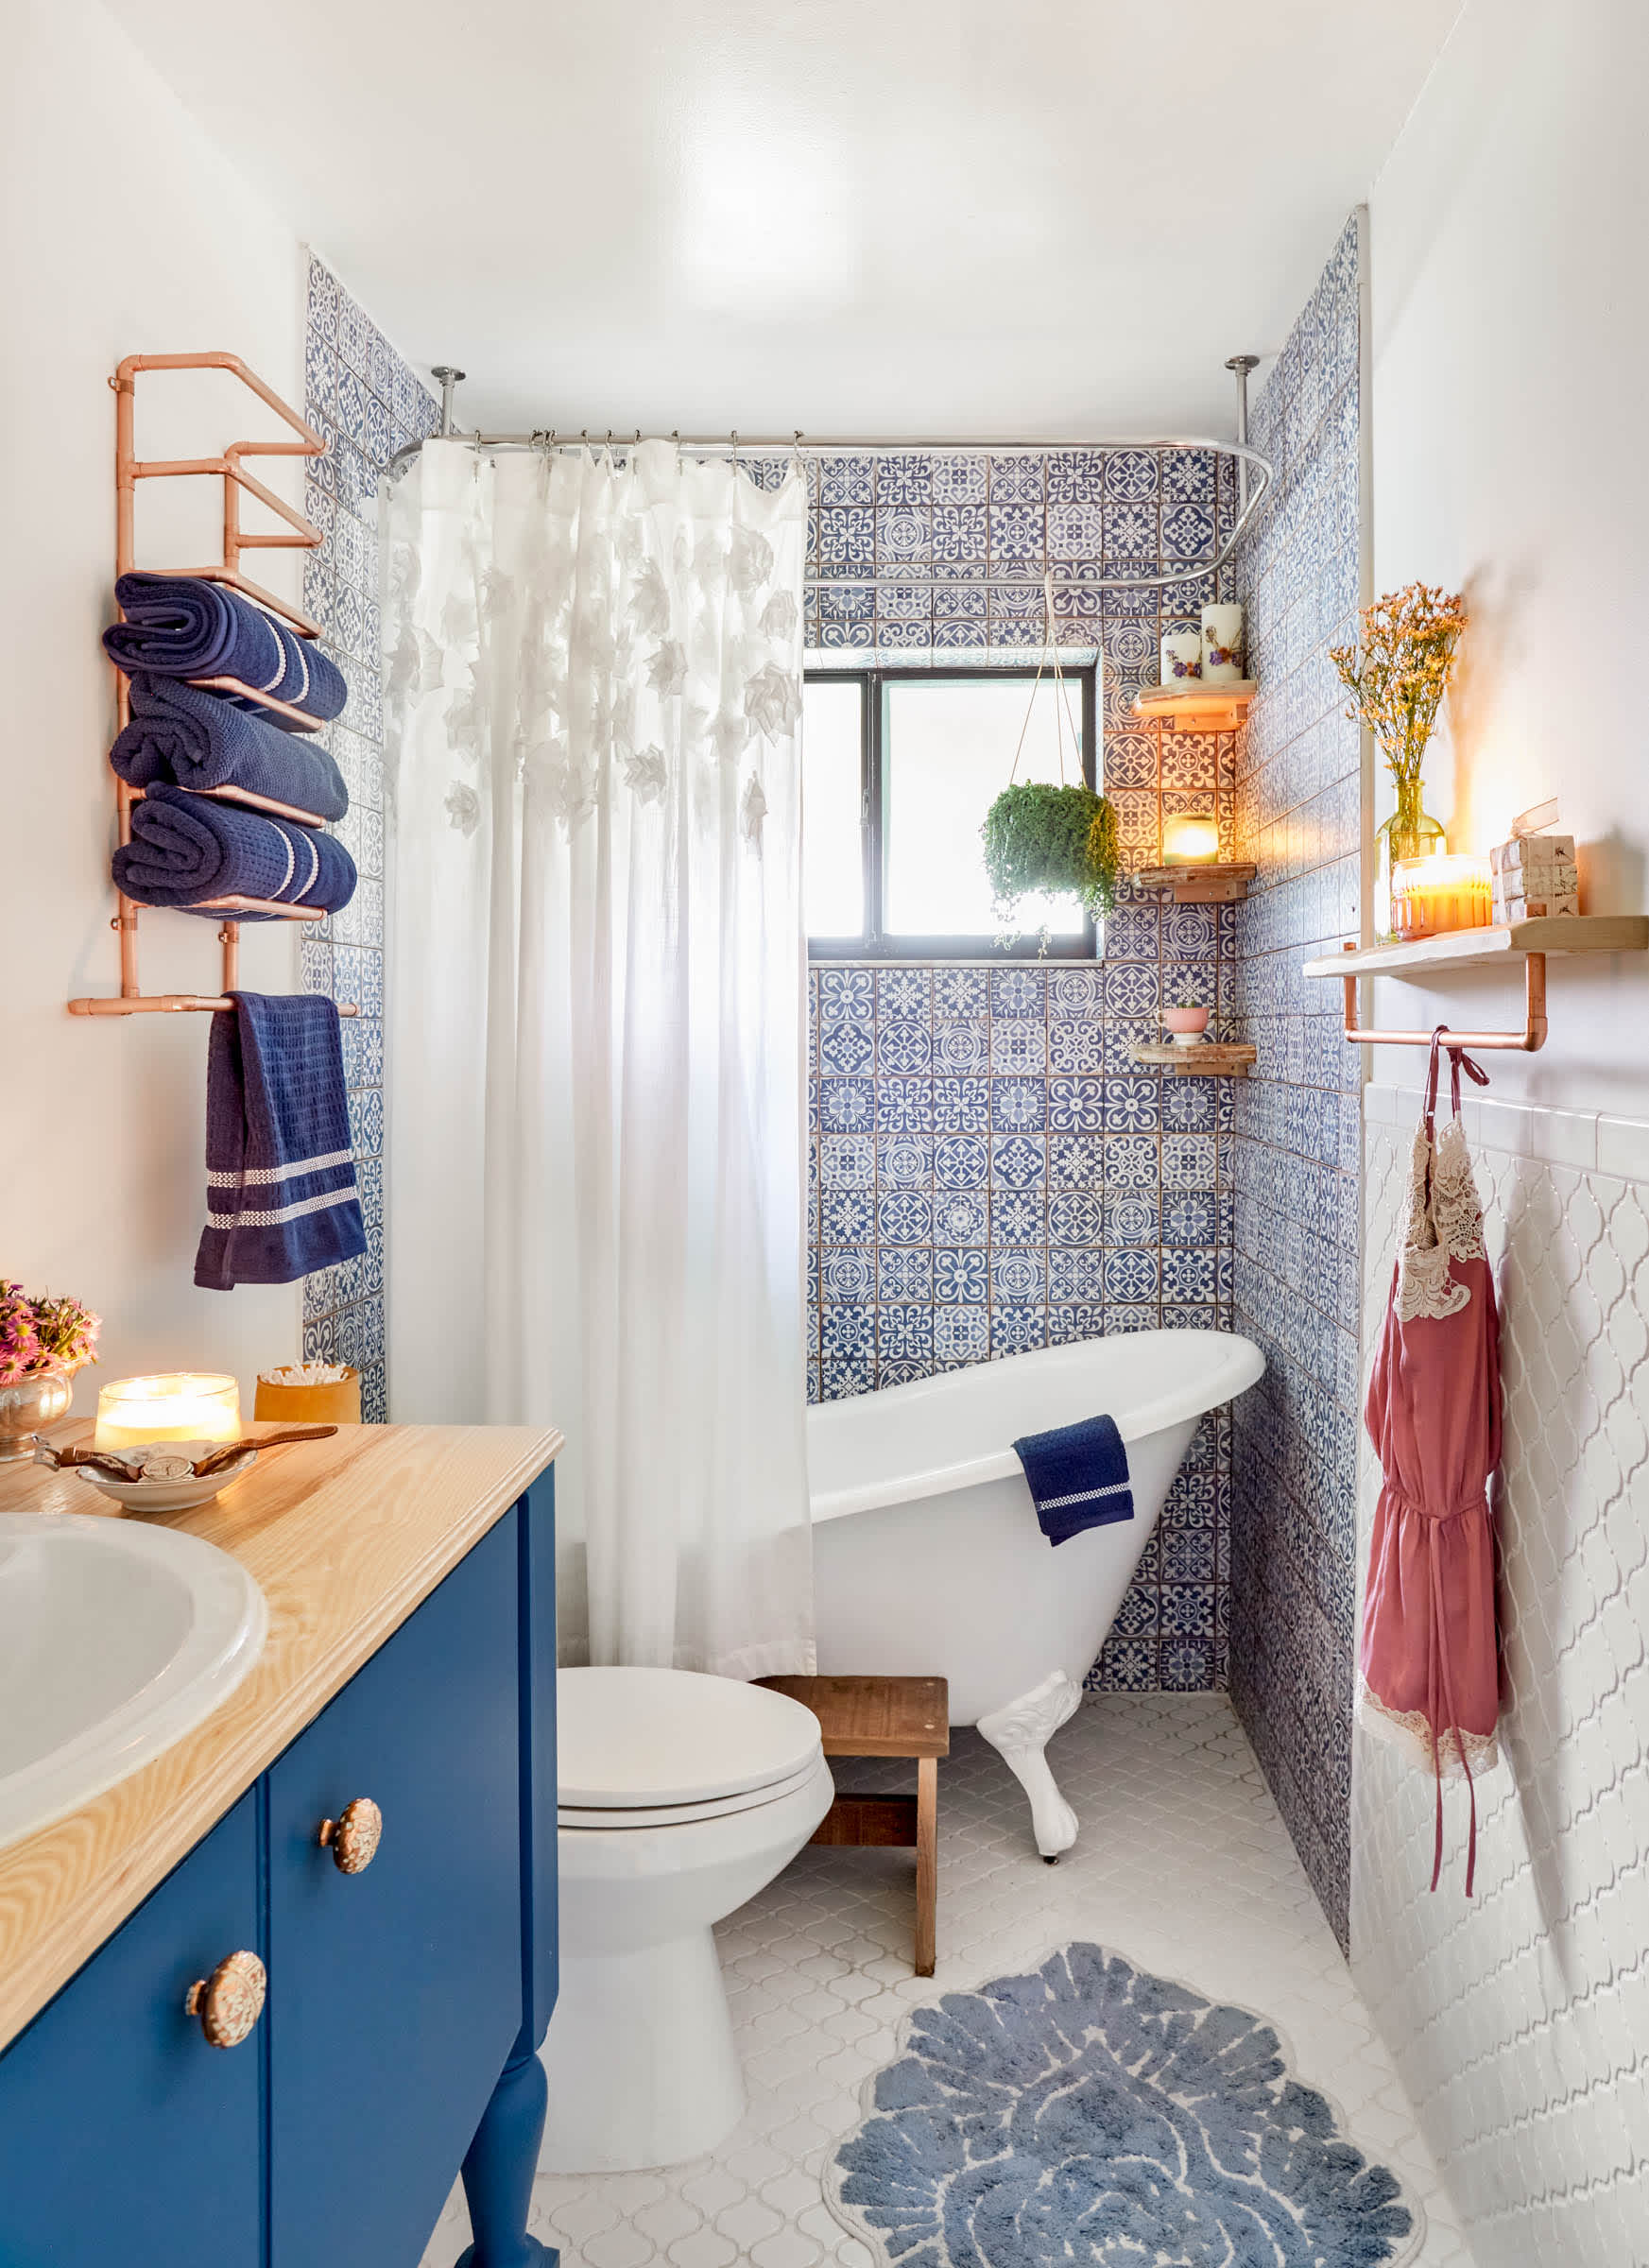 60 Small Bathroom Ideas for Decorating Tiny Spaces | Apartment Therapy